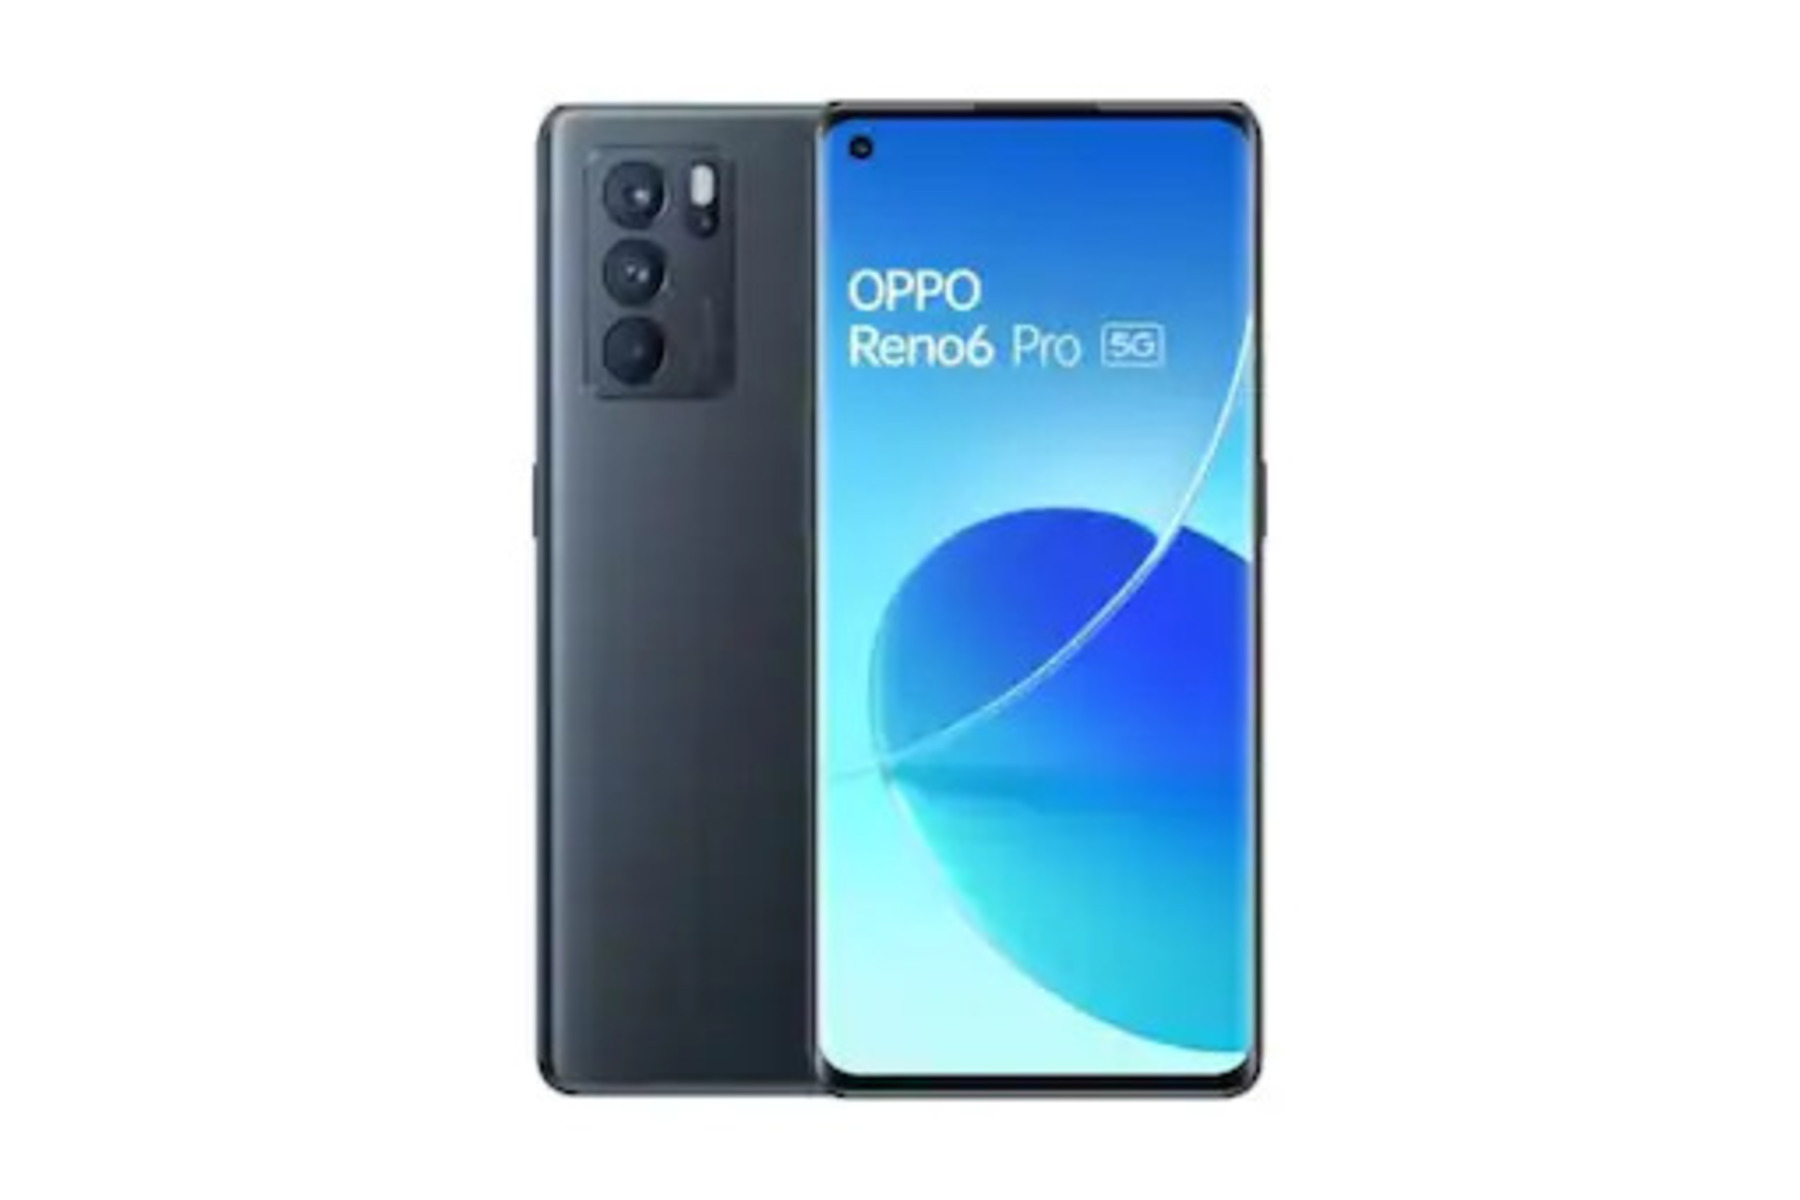 OPPO Reno6 Pro 5G sale starts today, know specifications and price